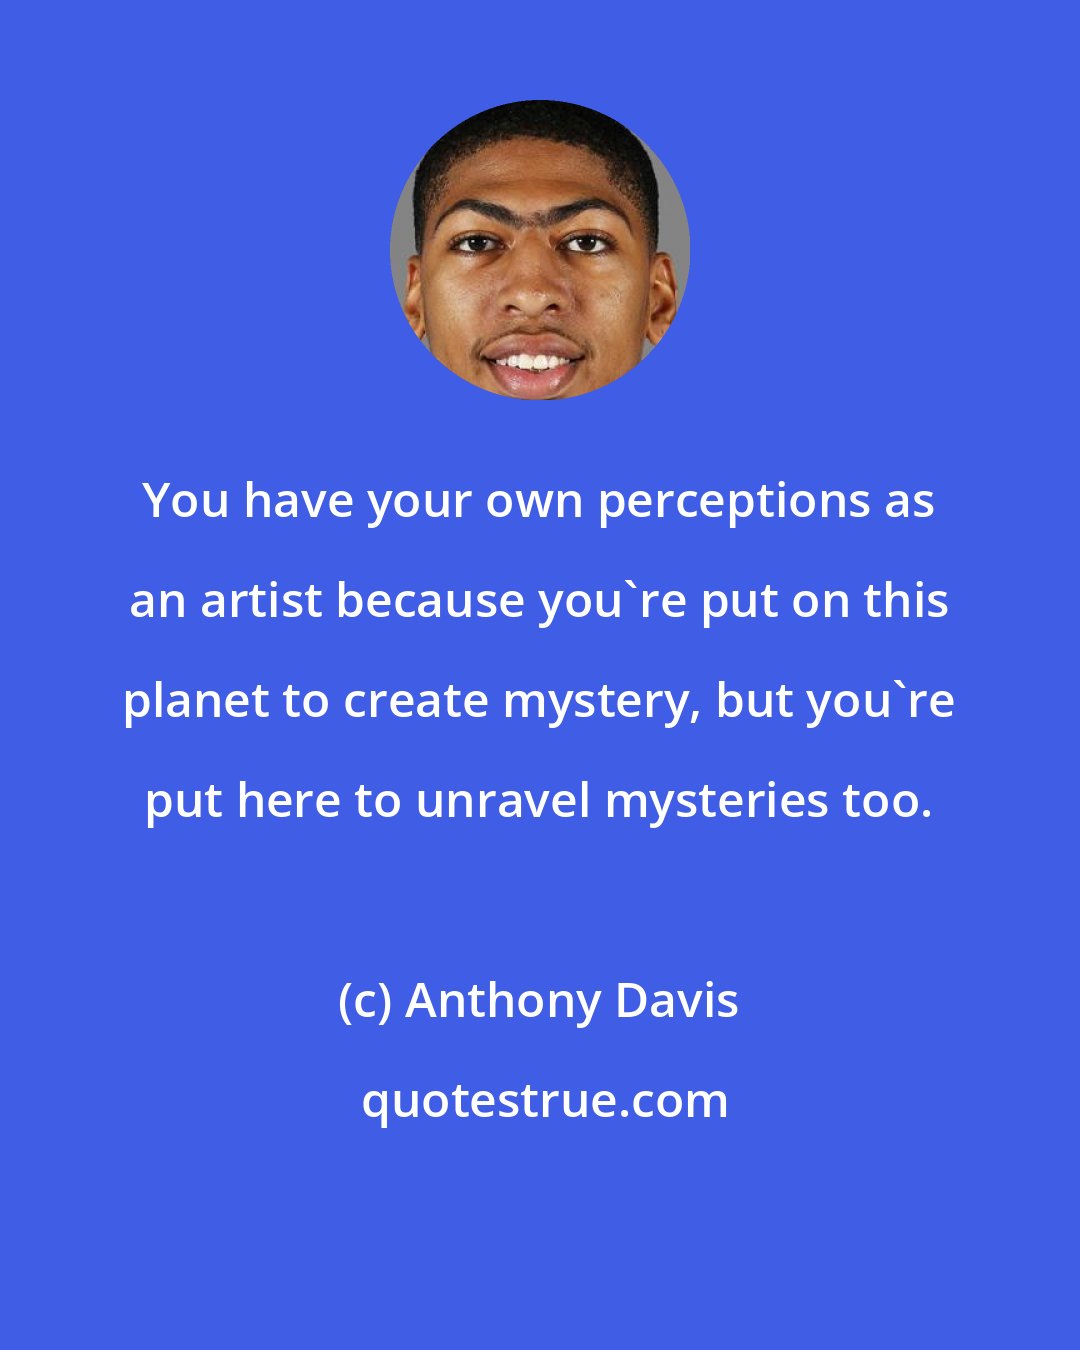 Anthony Davis: You have your own perceptions as an artist because you're put on this planet to create mystery, but you're put here to unravel mysteries too.